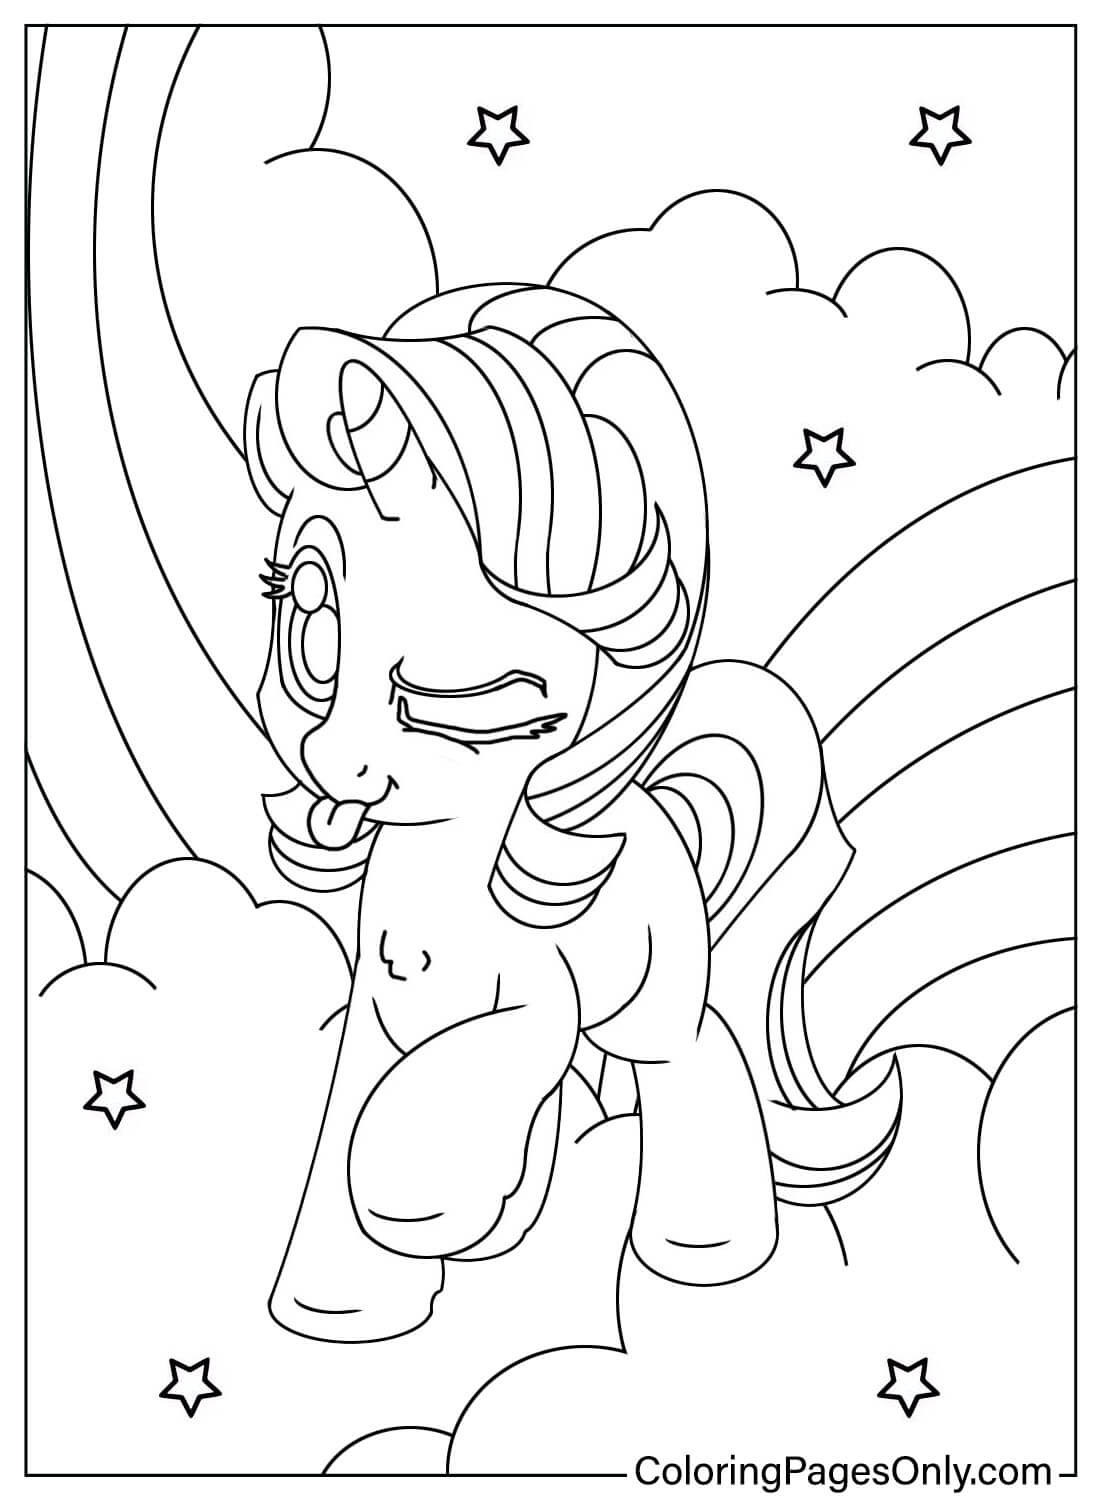 Funny Starlight Glimmer Coloring Page from Starlight Glimmer